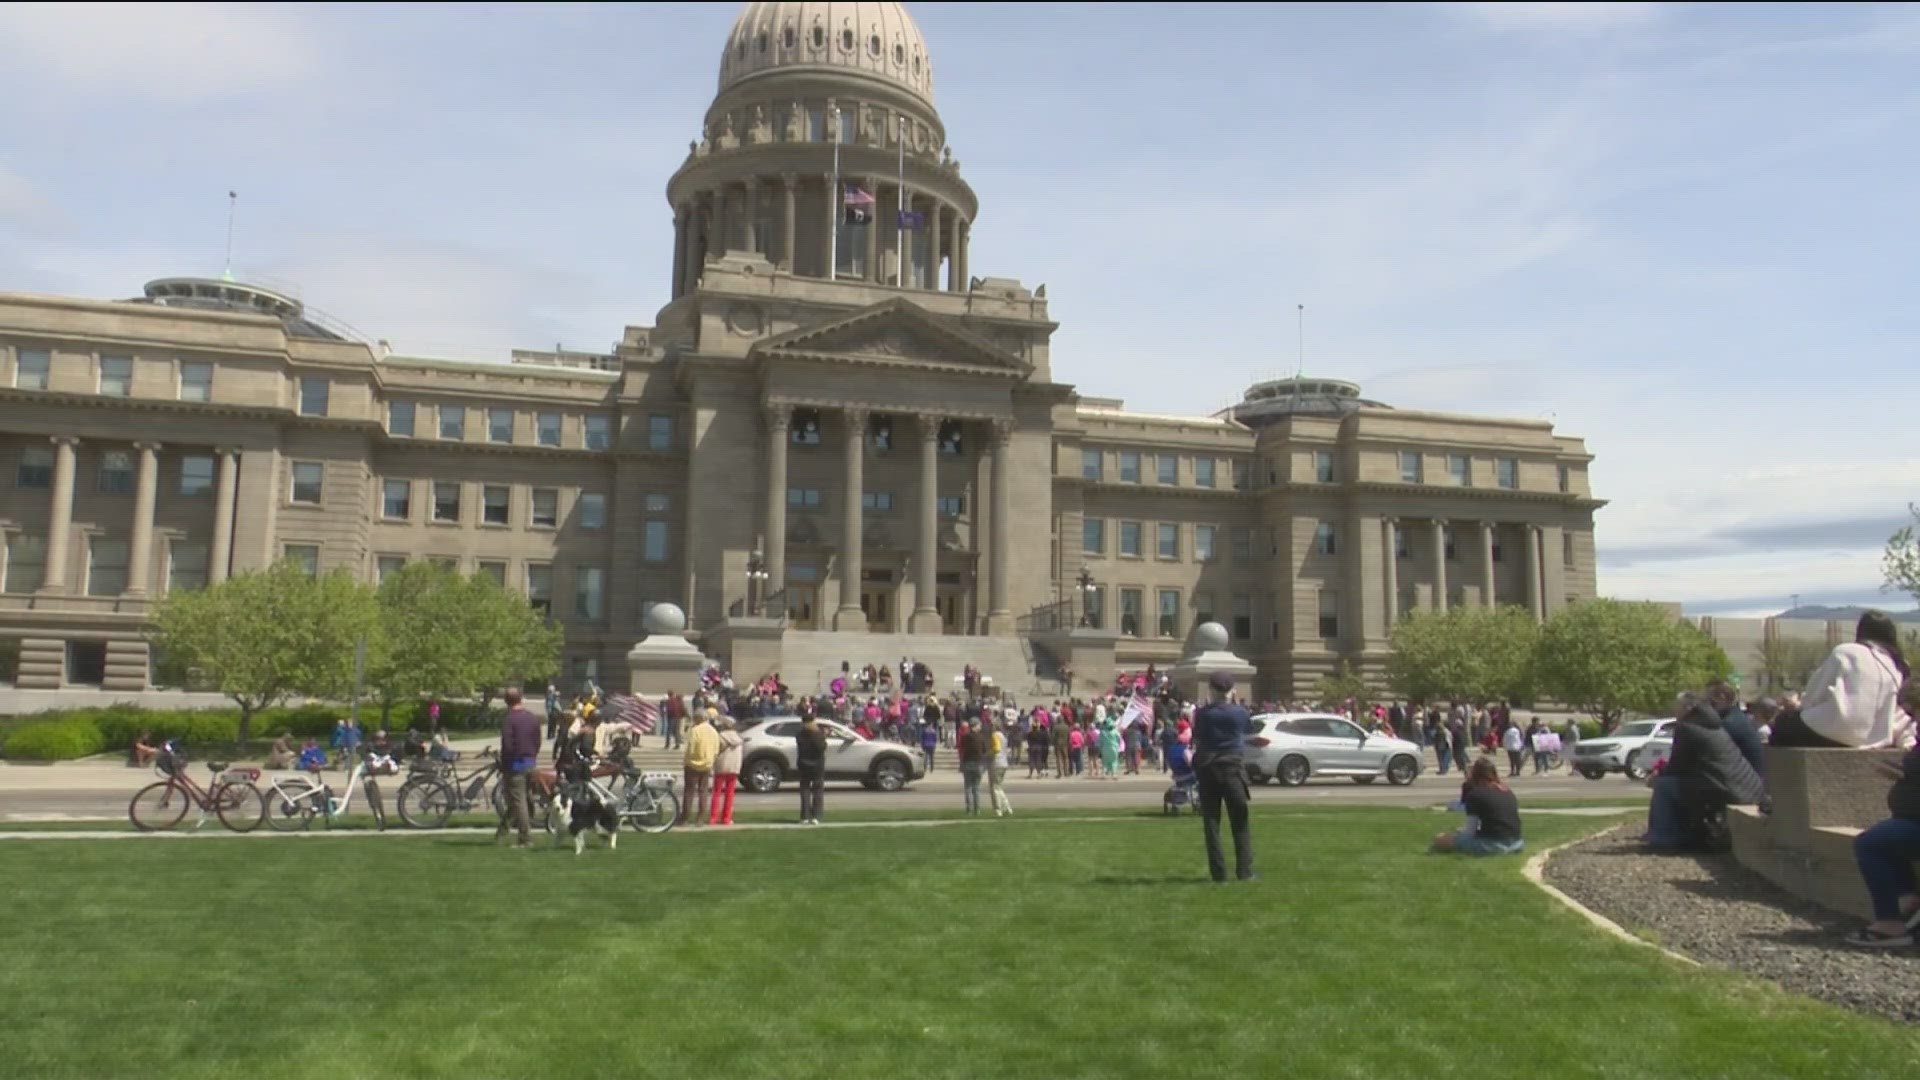 The rally was in opposition of Idaho's strict abortion ban.